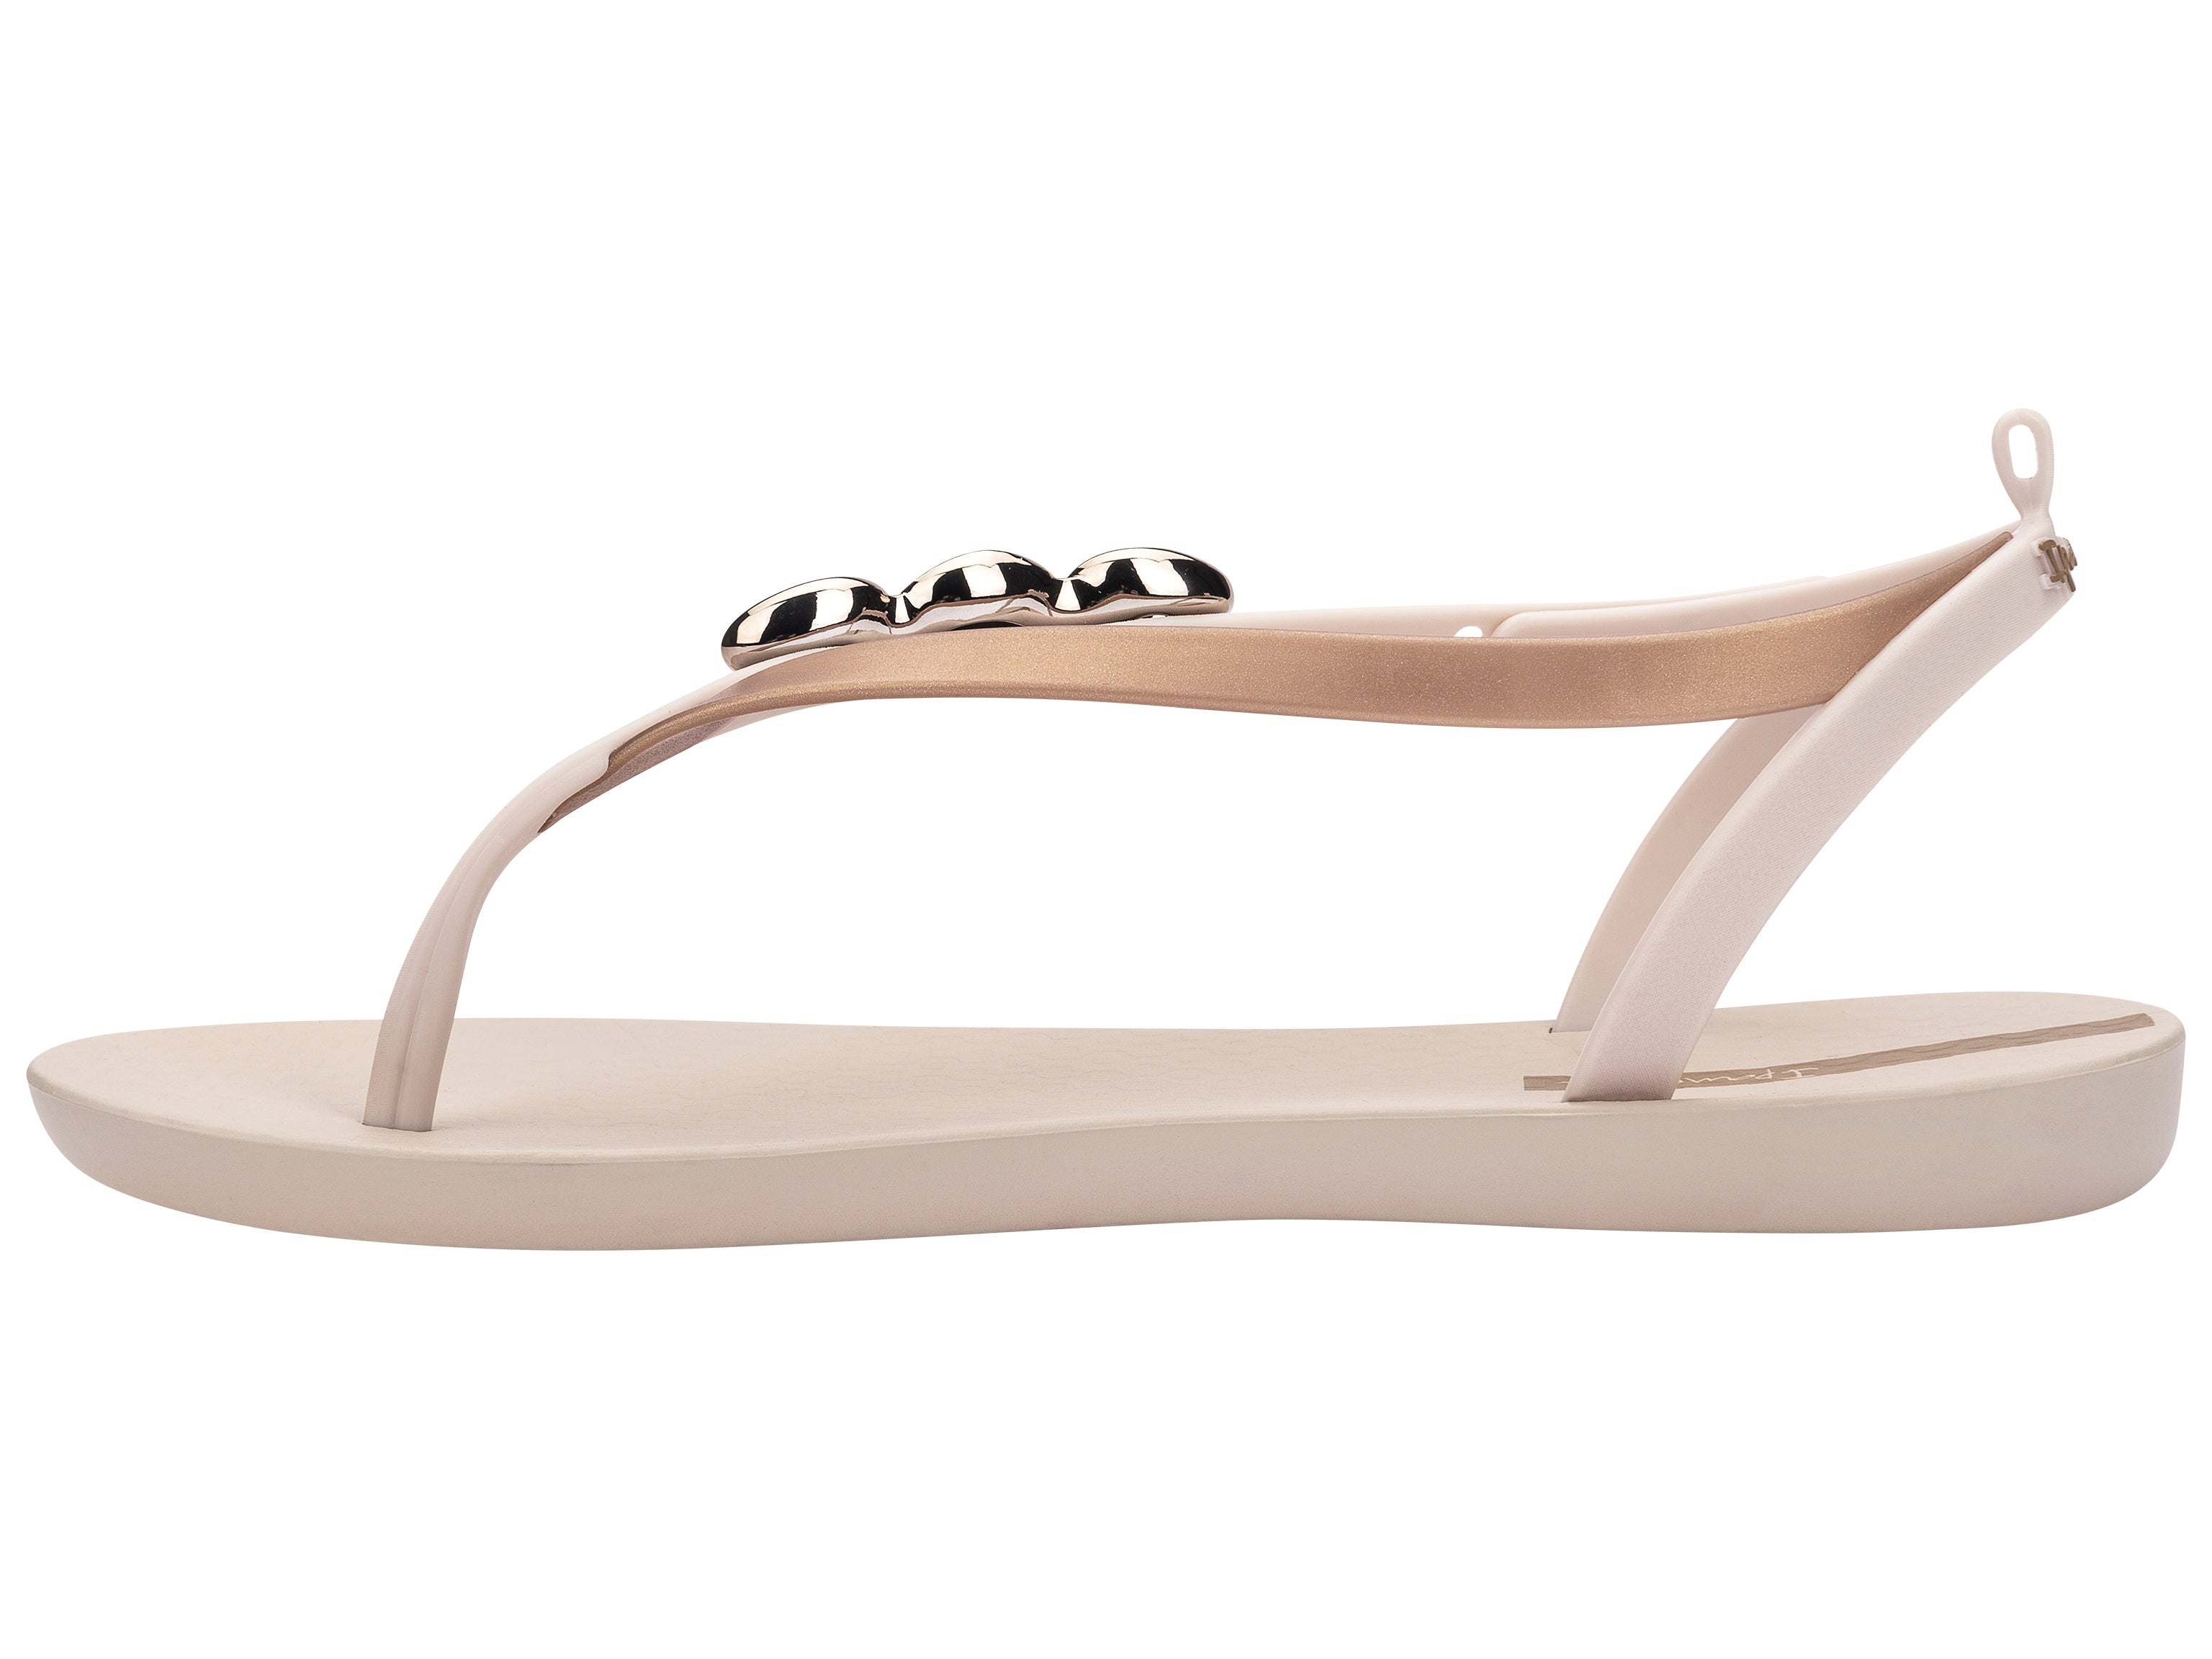 Inner side view of a beige Ipanema Salty women's sandal with 3 gold shells on the strap.